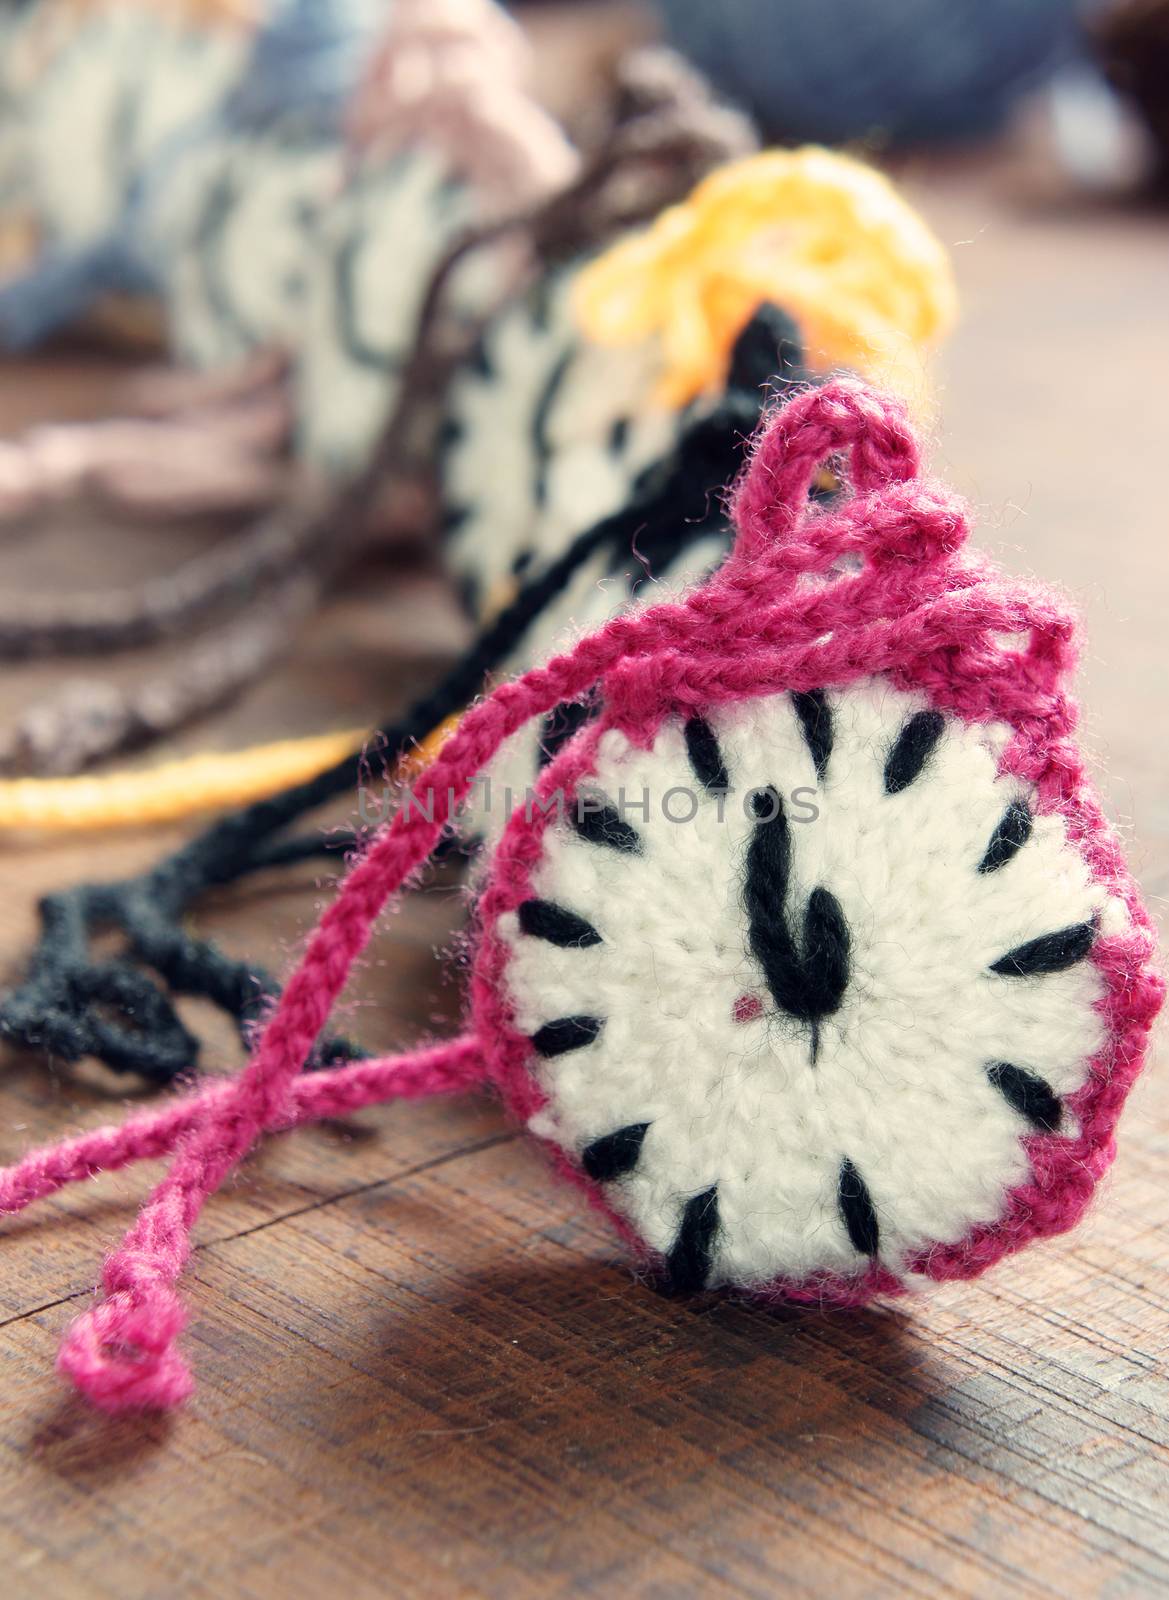 Amazing knitted clock, group of colorful watch make from yarn to happy new year, wonderful idea for handmade hobby, in warm color, abstract art